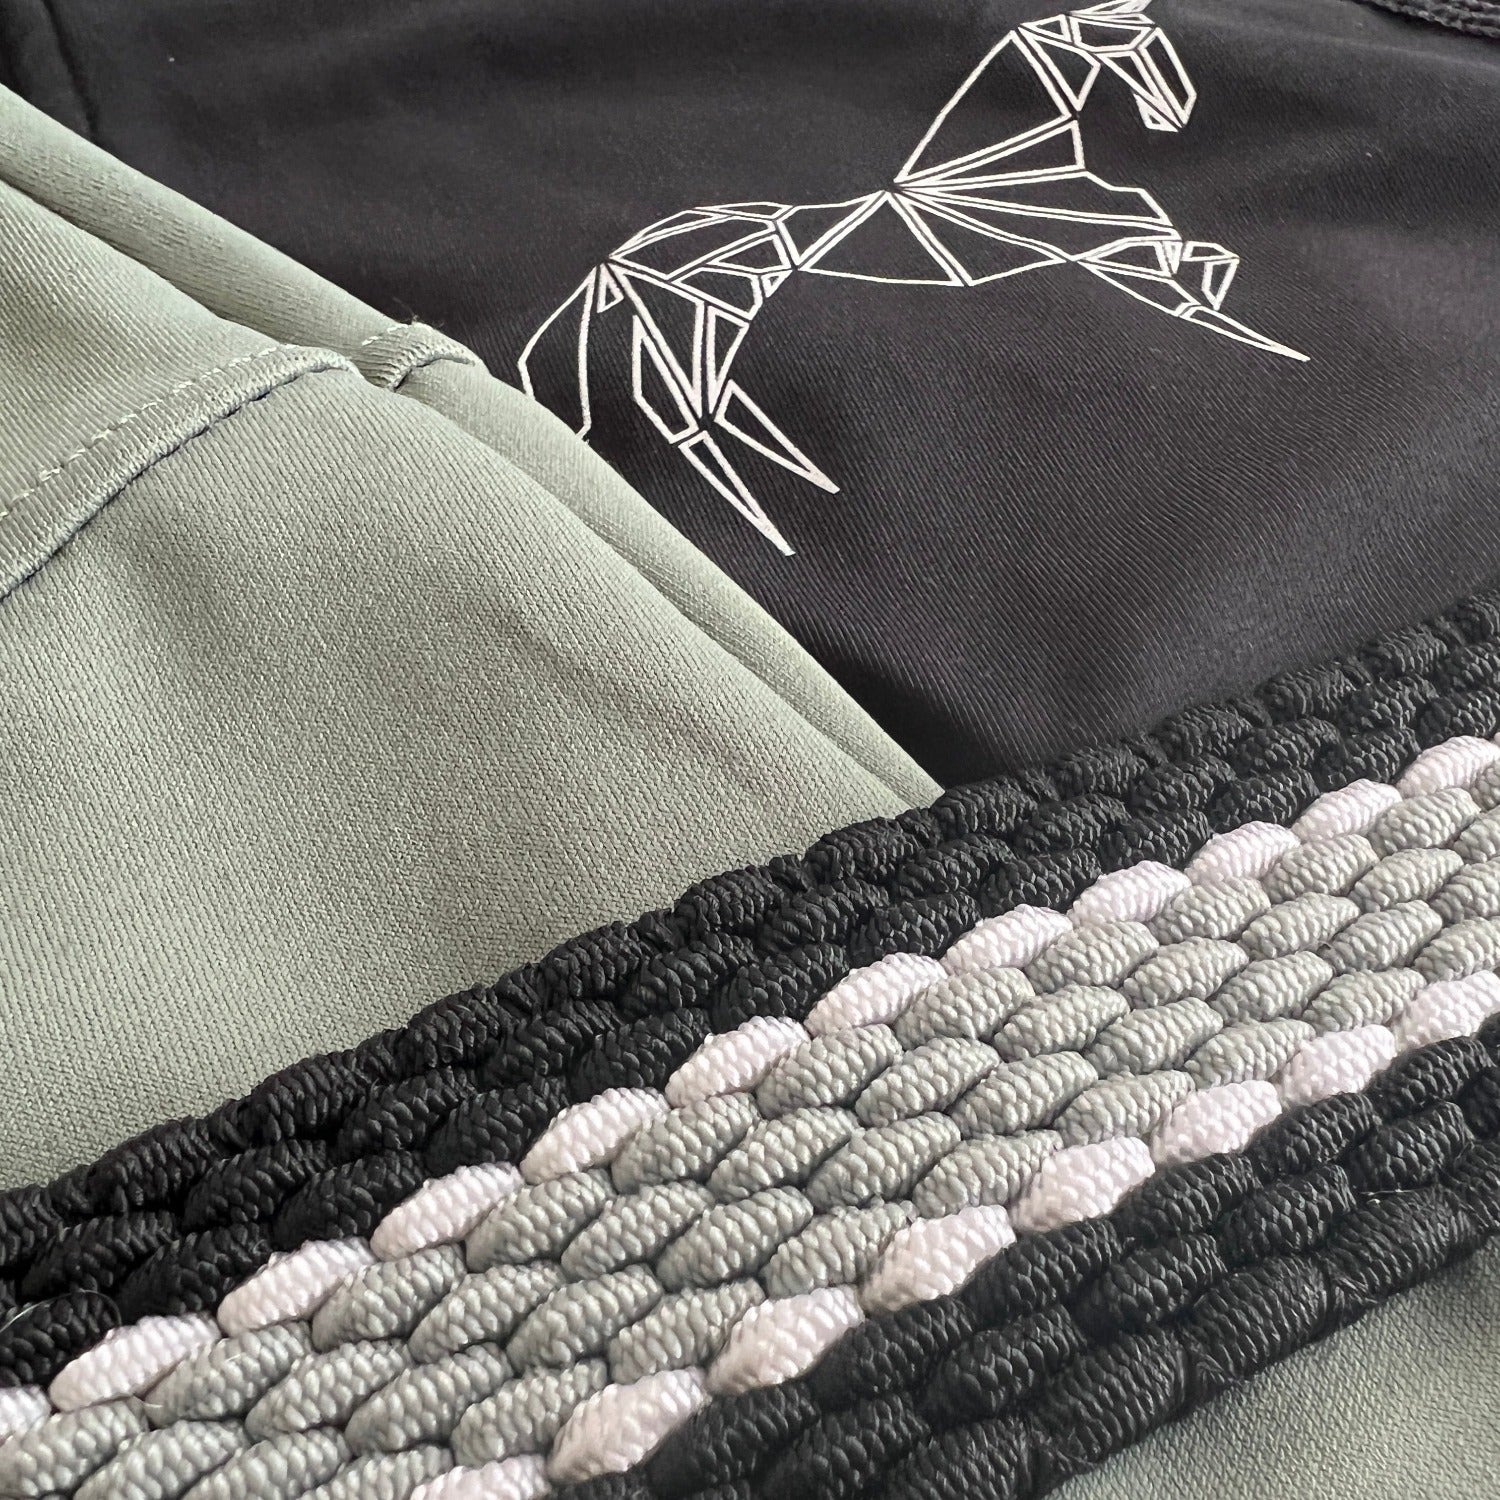 Close-up of black and green fabric with an embroidered geometric horse design on the black section. Below the fabric, Pure Canter's The Braided Belt features a braided strap with interwoven black, gray, and white strands and a secure buckle for added functionality.